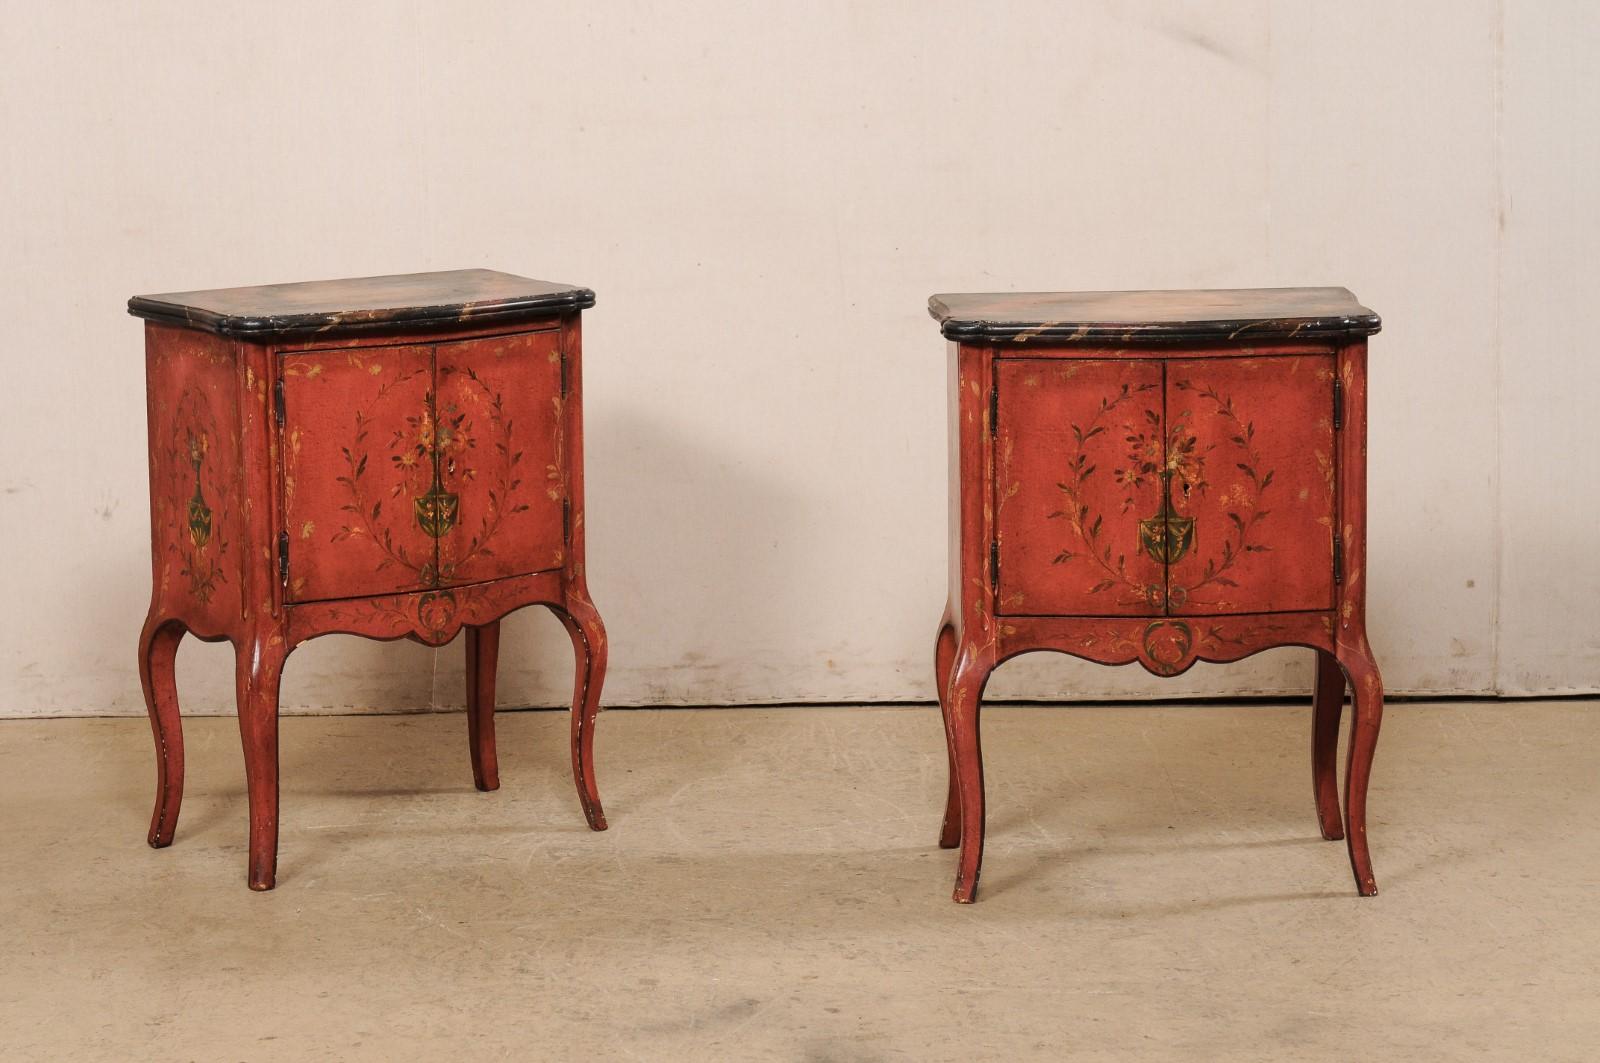 A pair of French-style raised side chests with decoratively painted wood finish and shapely bodies. This vintage pair of commodes from America, have been designed with French influences and feature gently bowed bodies with scalloped top corners, and